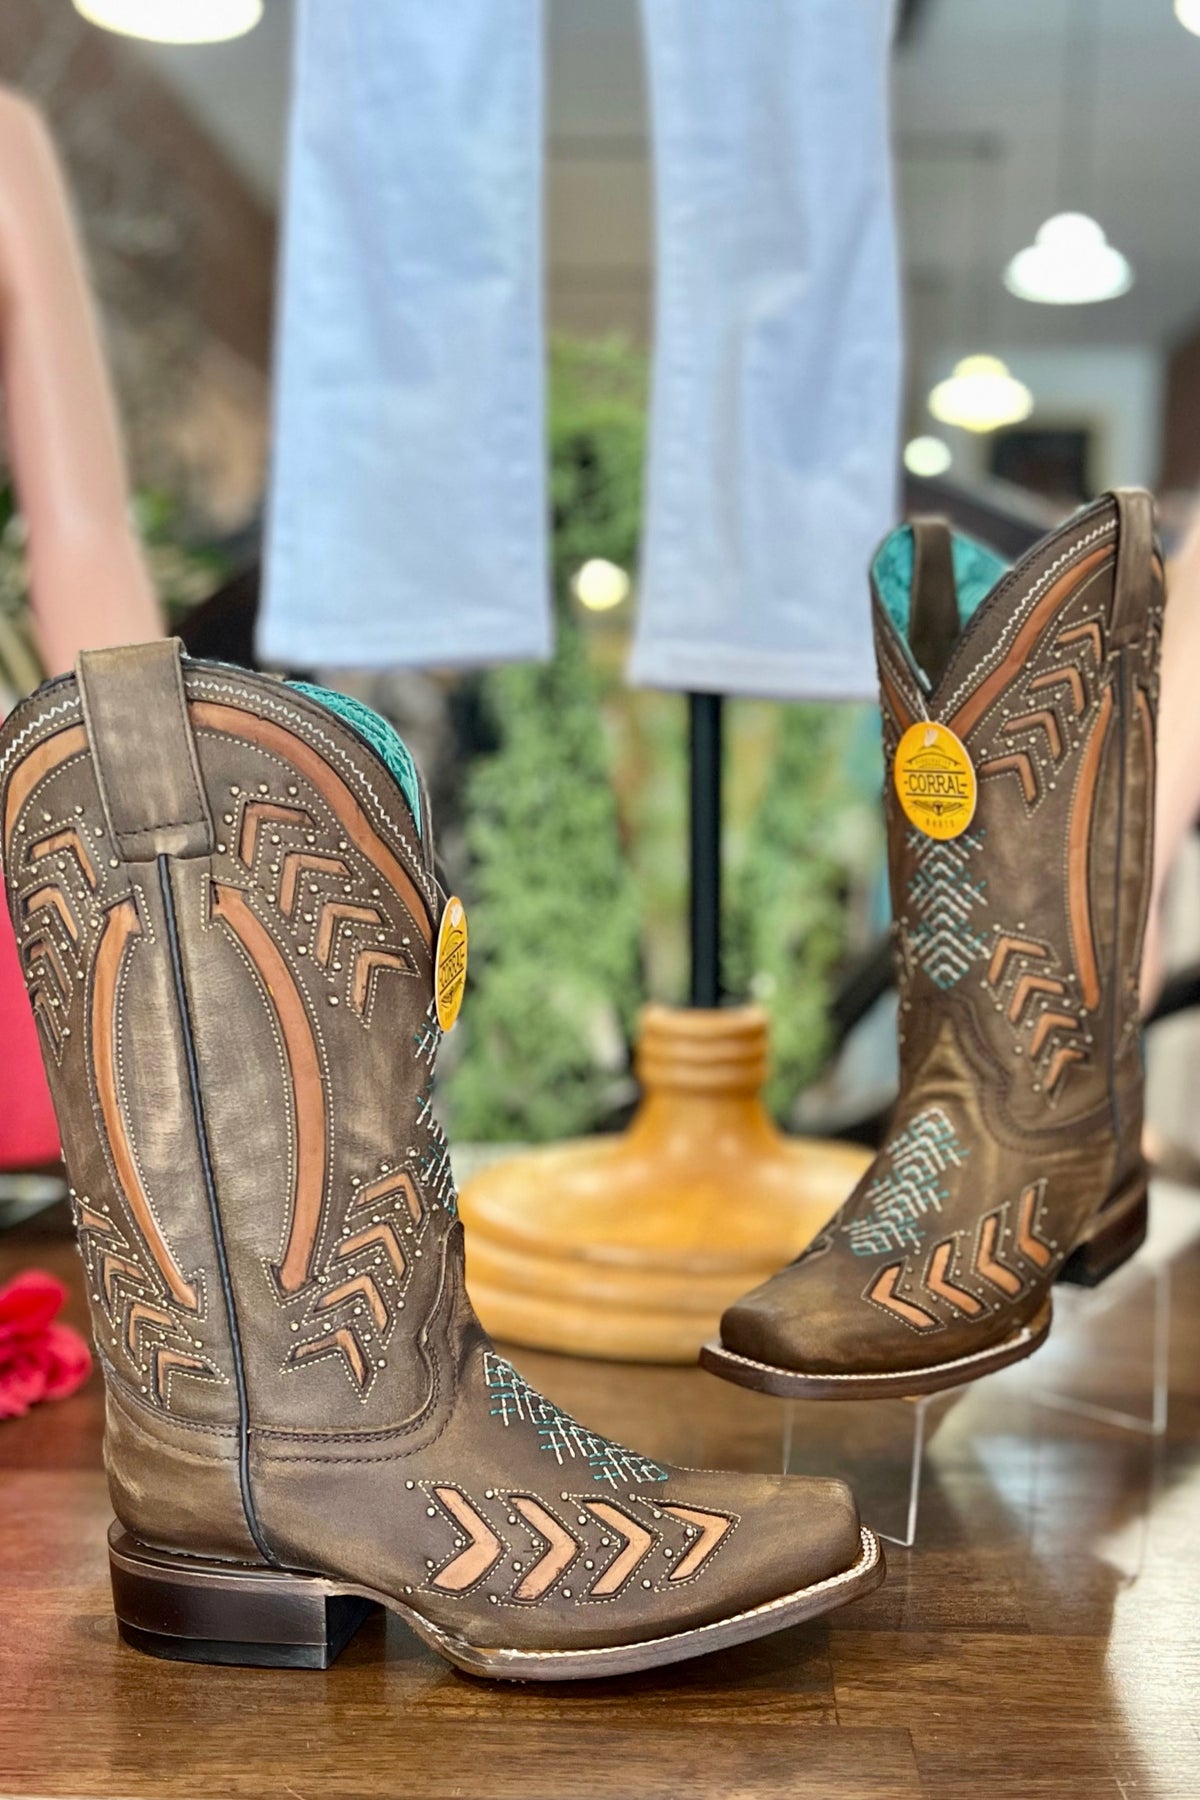 Corral Women's Arrow Inlay Embroidered Studded Square Toe Boot-Women's Boot-Corral Boots-Gallop 'n Glitz- Women's Western Wear Boutique, Located in Grants Pass, Oregon